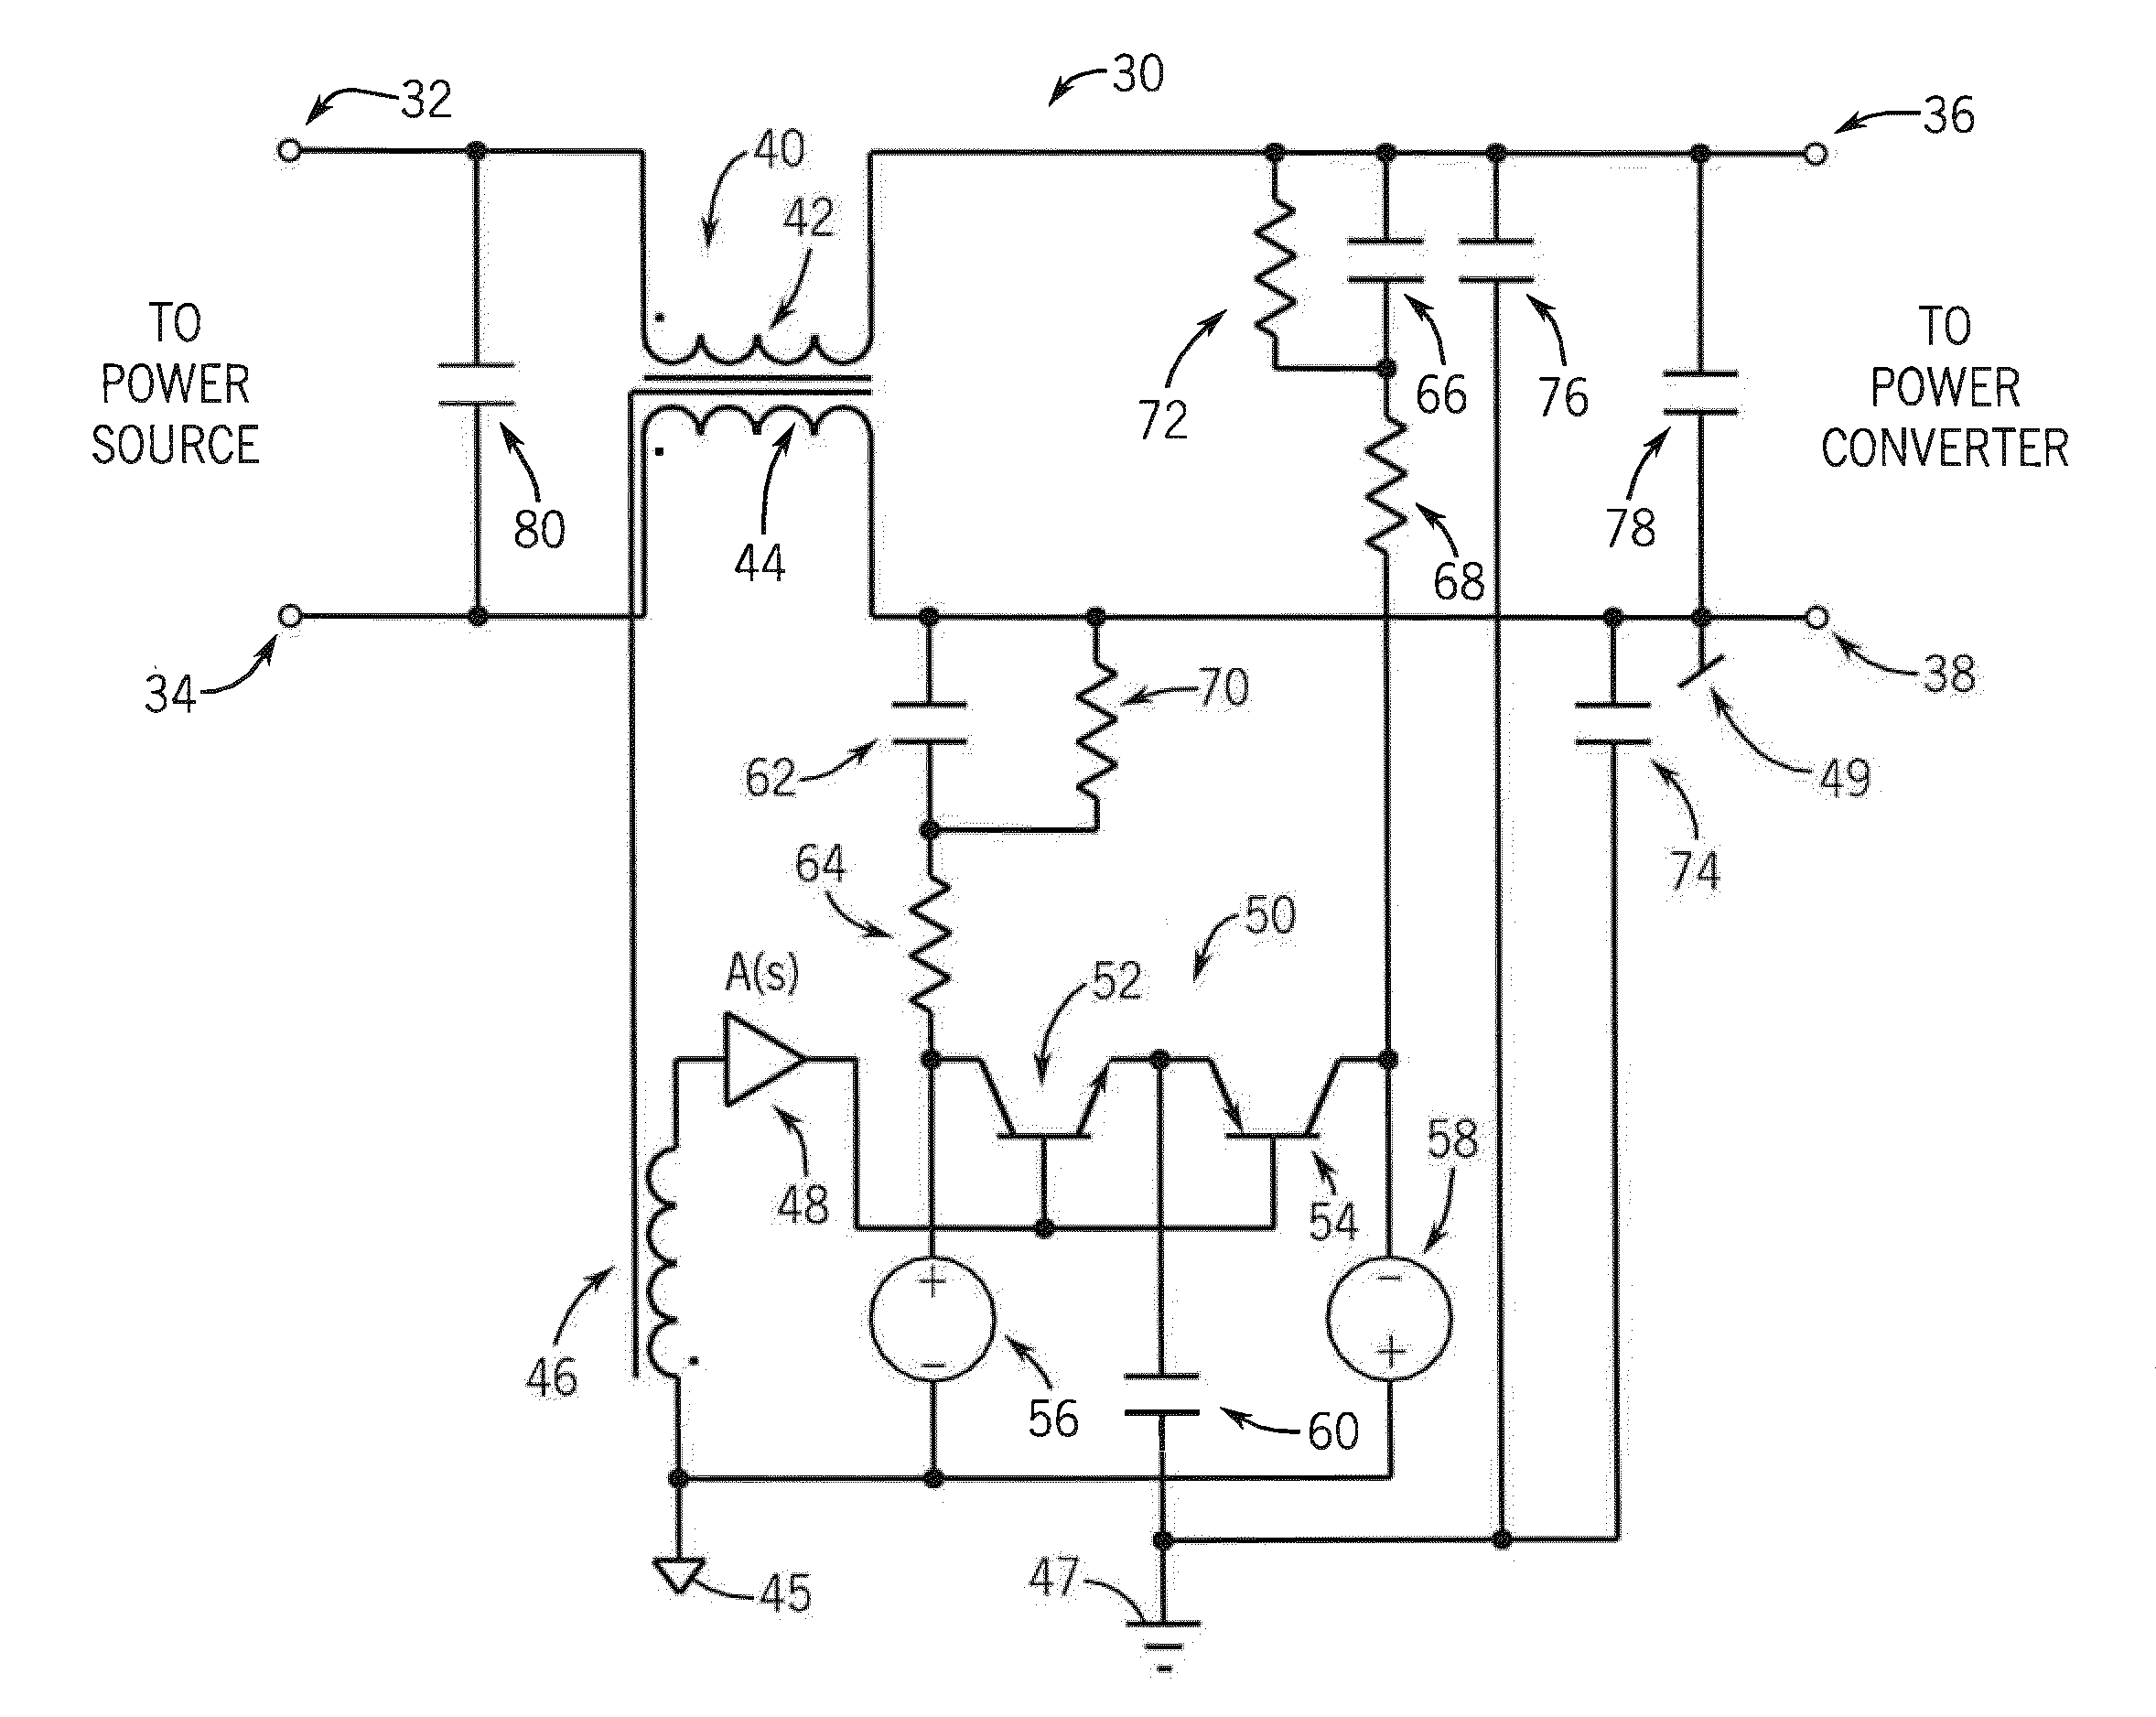 Apparatus and method for reducing EMI generated by a power conversion device